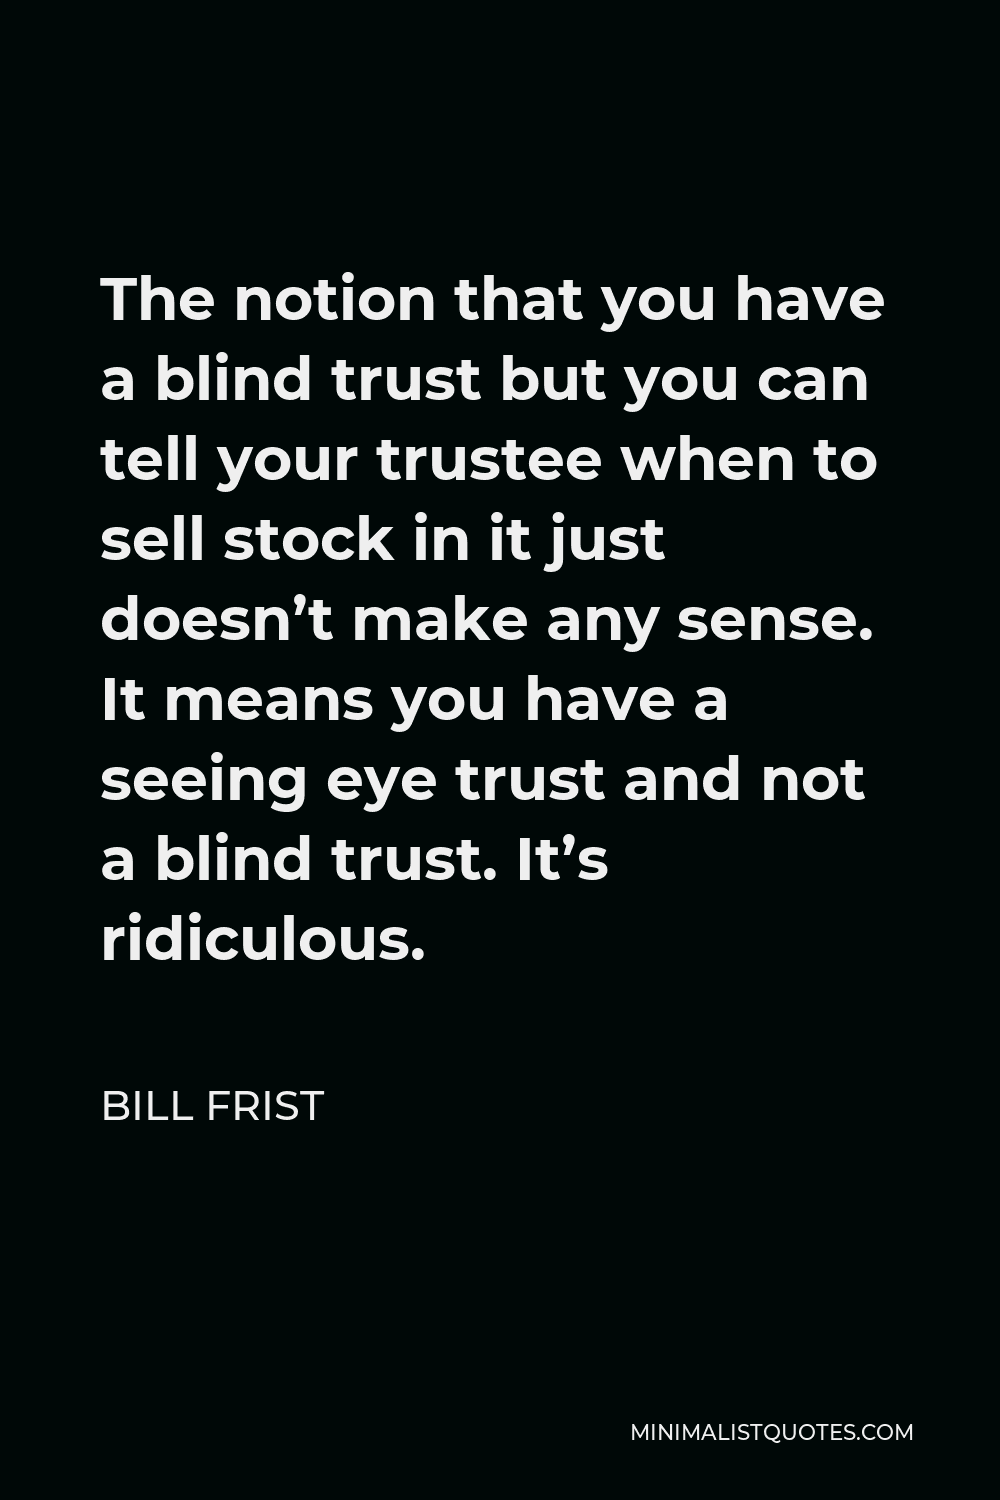 Bill Frist Quote - The notion that you have a blind trust but you can tell your trustee when to sell stock in it just doesn’t make any sense. It means you have a seeing eye trust and not a blind trust. It’s ridiculous.